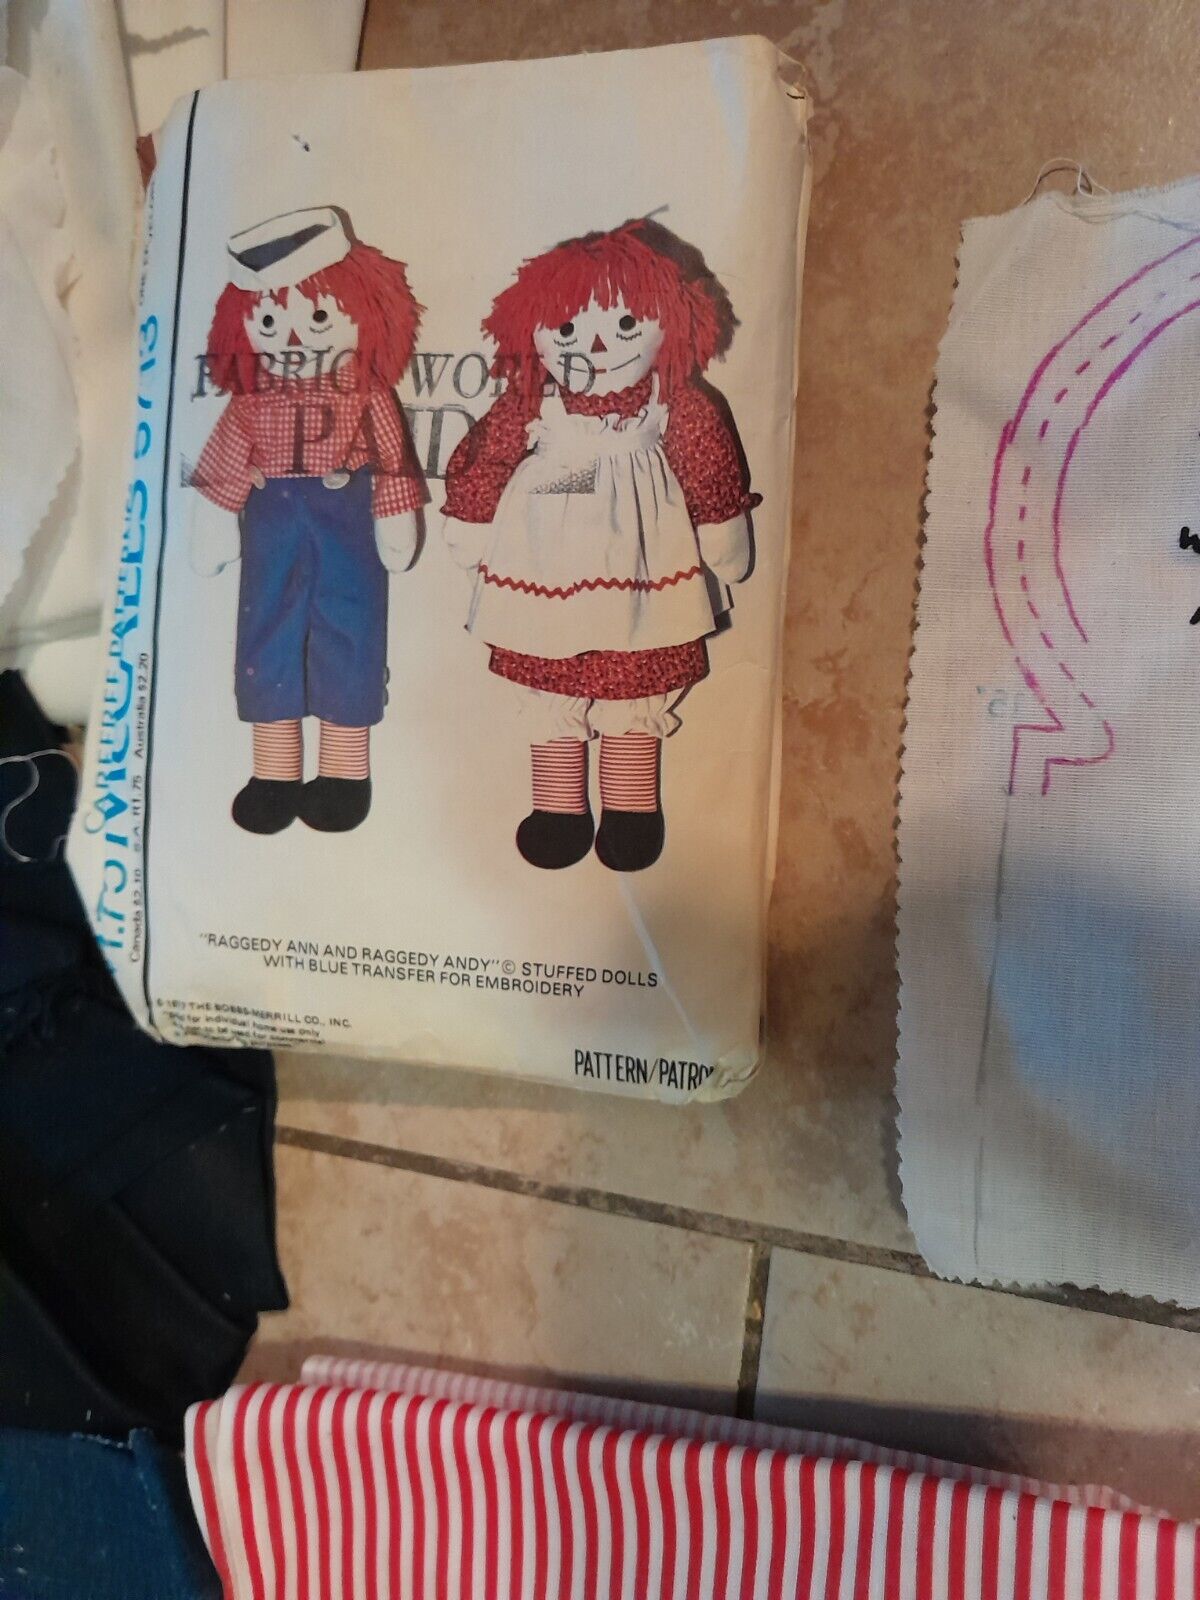 1977 McCalls Raggedy Ann and Andy Sew Pattern with Kit